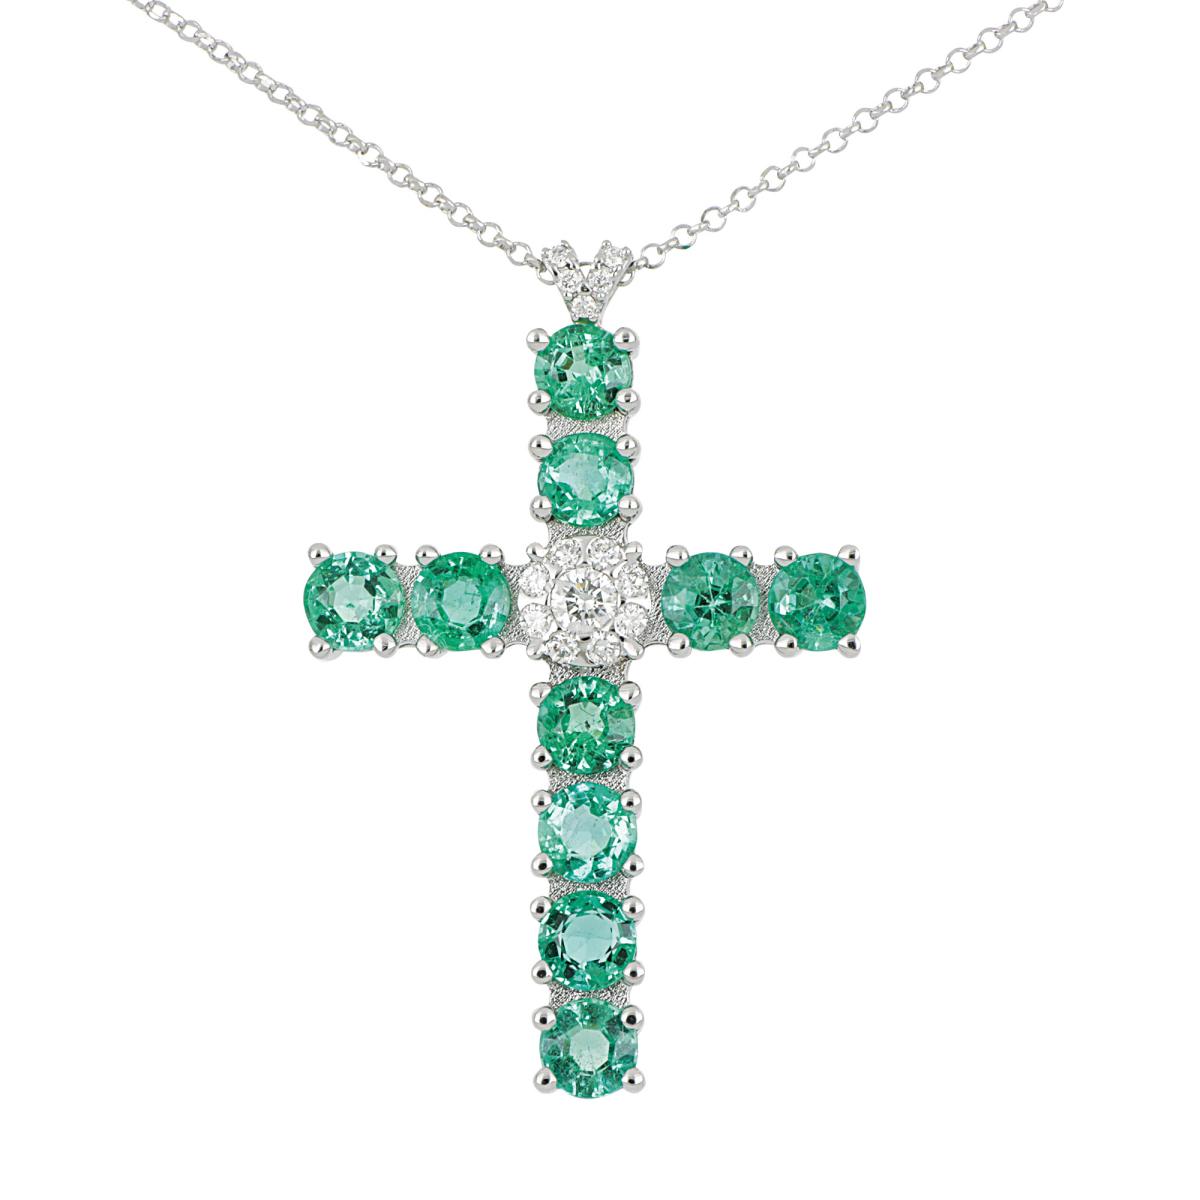 Cross necklace with diamonds and precious stones measuring 4.00mm